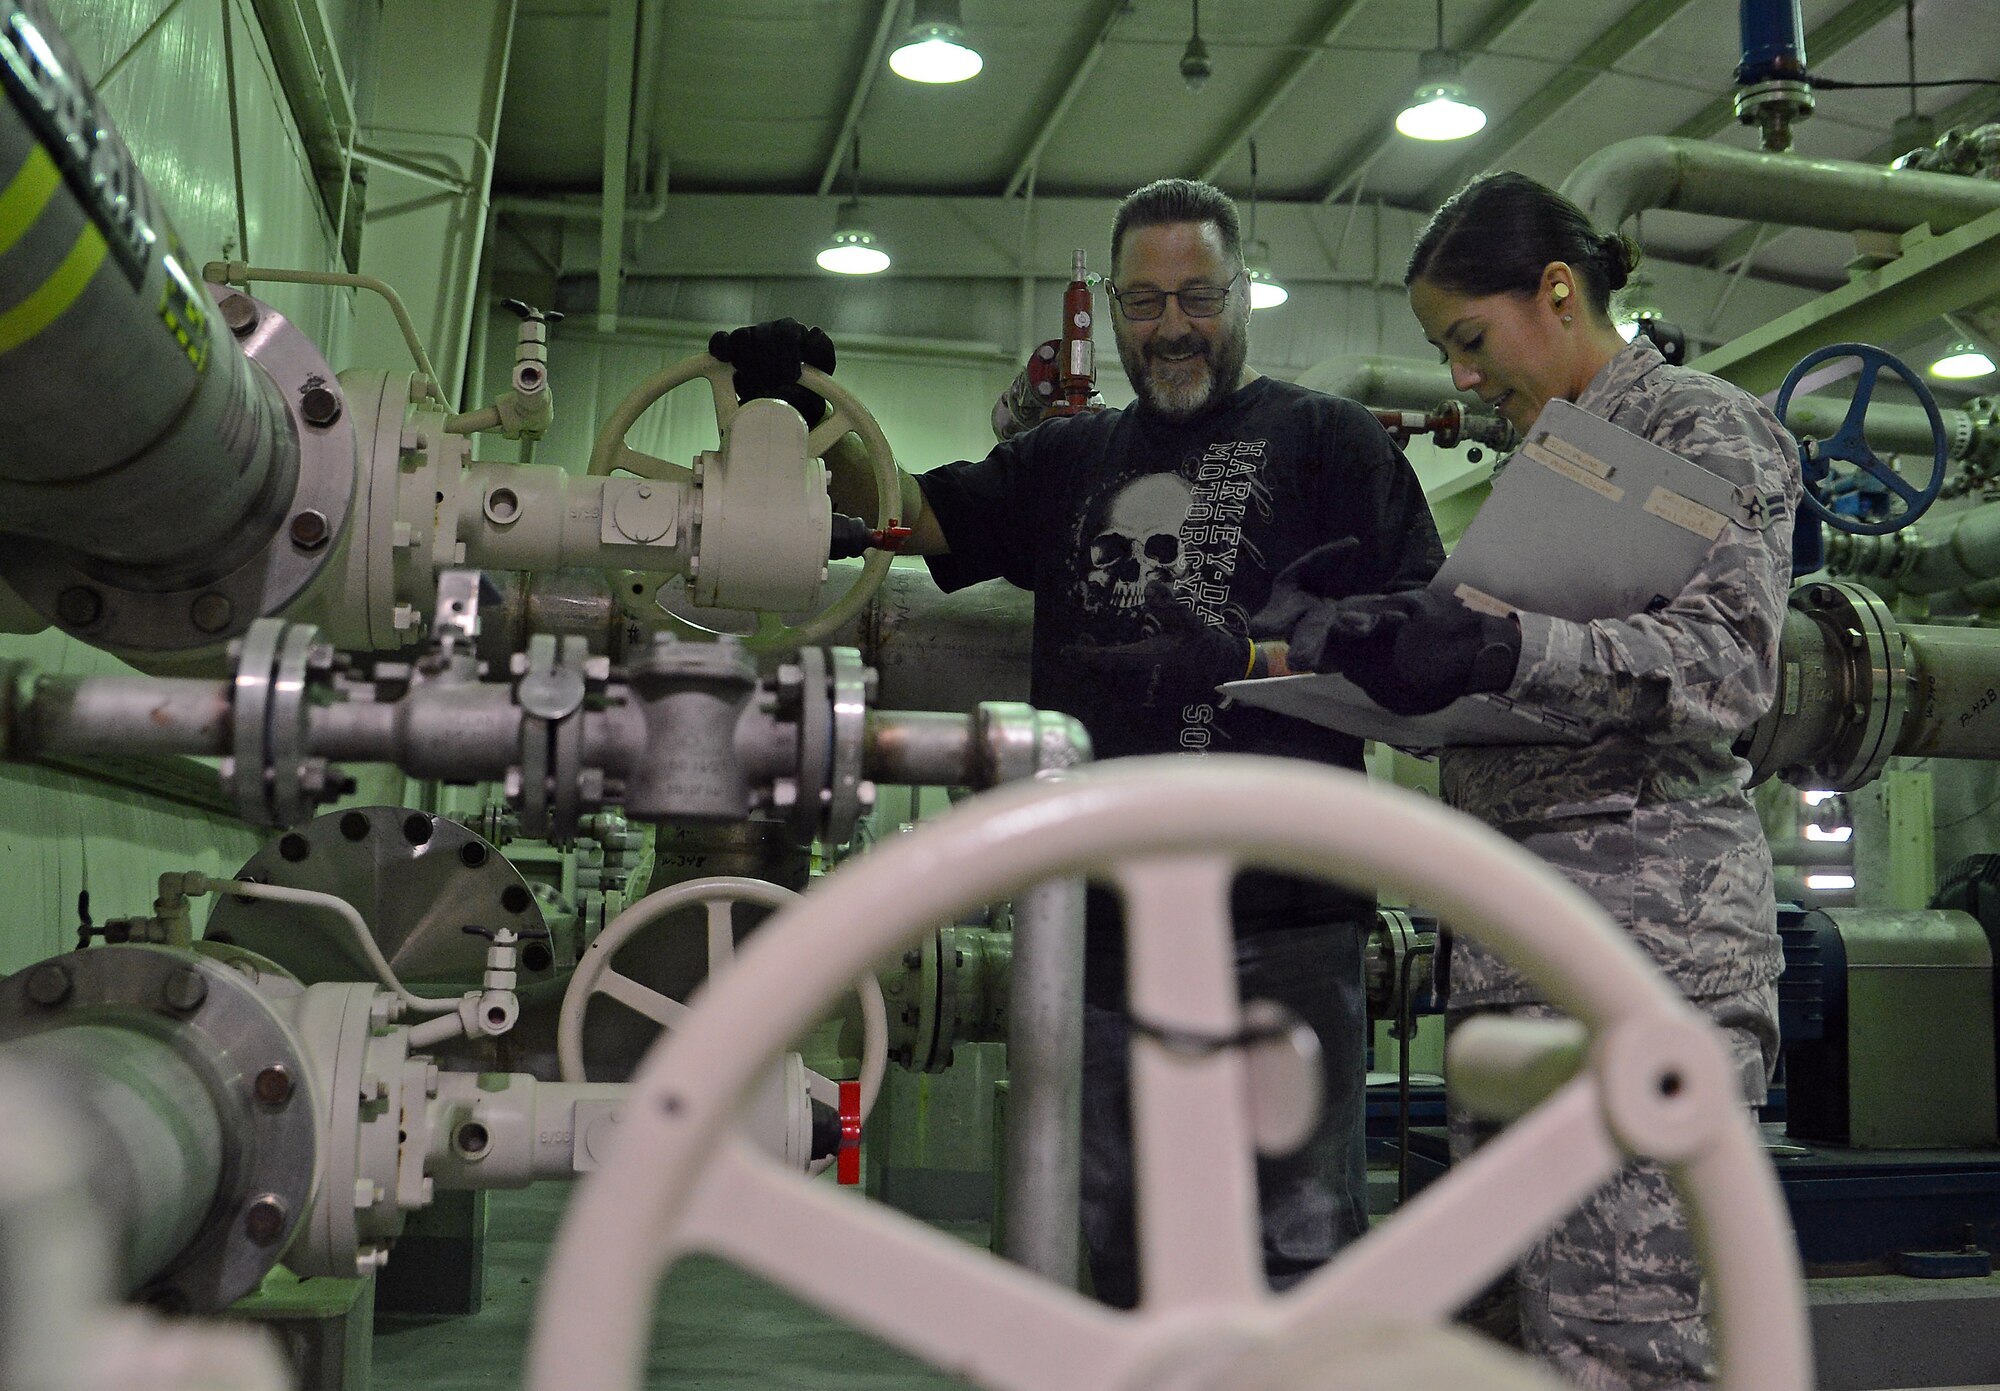 Airman 1st Class Kelsey Villegas, 627th Logistics Readiness Squadron fuels apprentice, and Gary Lam, 627th LRS fuels supervisor, inspects one of many fuel valves Oct. 19, 2018 at Joint Base Lewis-McChord, Wash.